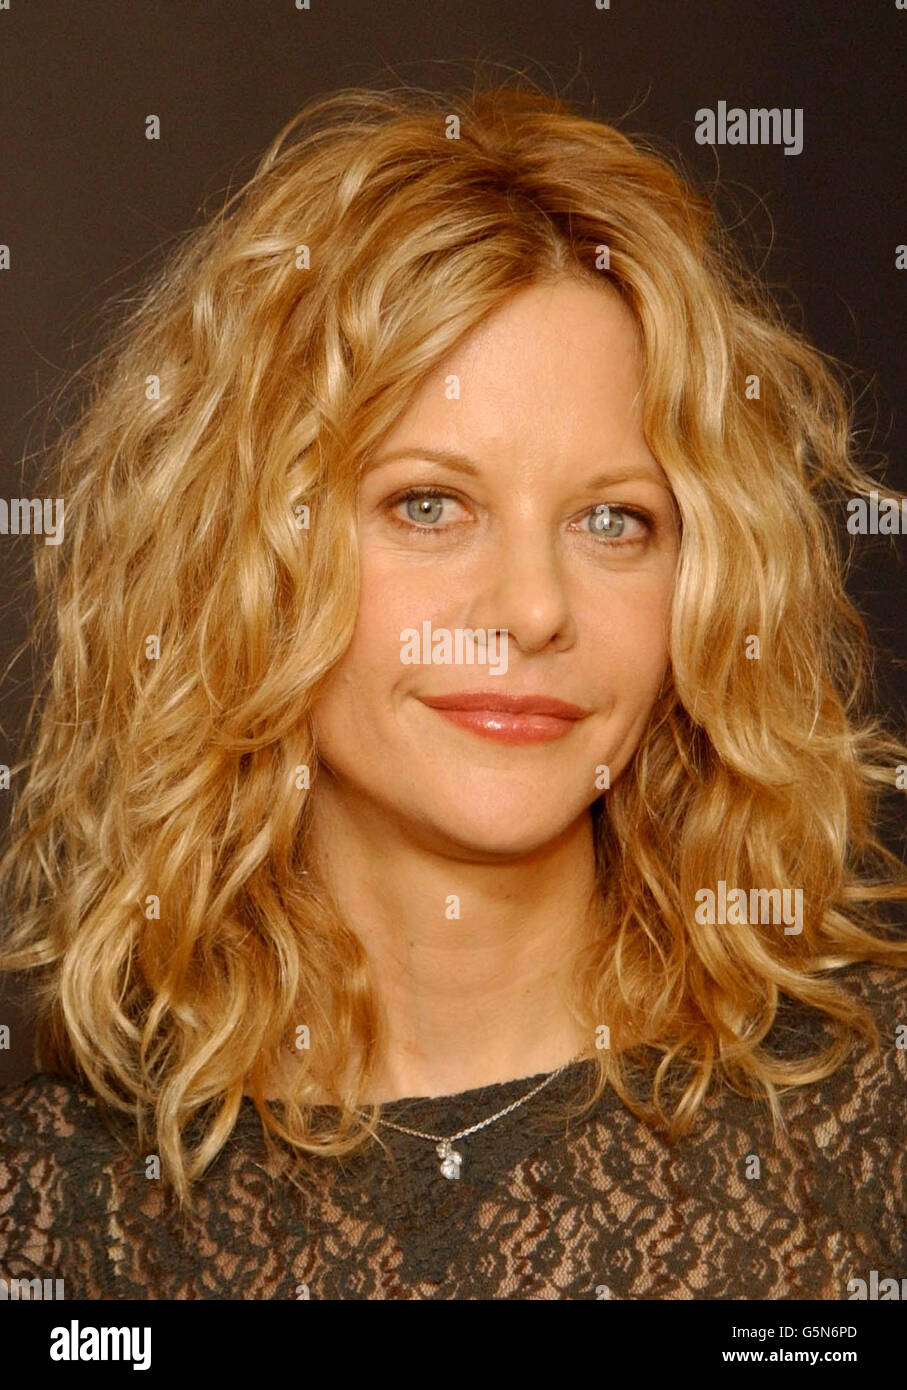 US actress Meg Ryan during a photocall at the Dorchester Hotel, London to promote their new film Kate & Leopold. lwpgalnews 29/01/04: Meg Ryan who has defended her sulky appearance on the BBC1 chat show Parkinson, it was revealed. The 42-year-old actress said that she felt Parkinson was 'hostile' from the start of the interview and she had been in the right to act the way she did. Stock Photo